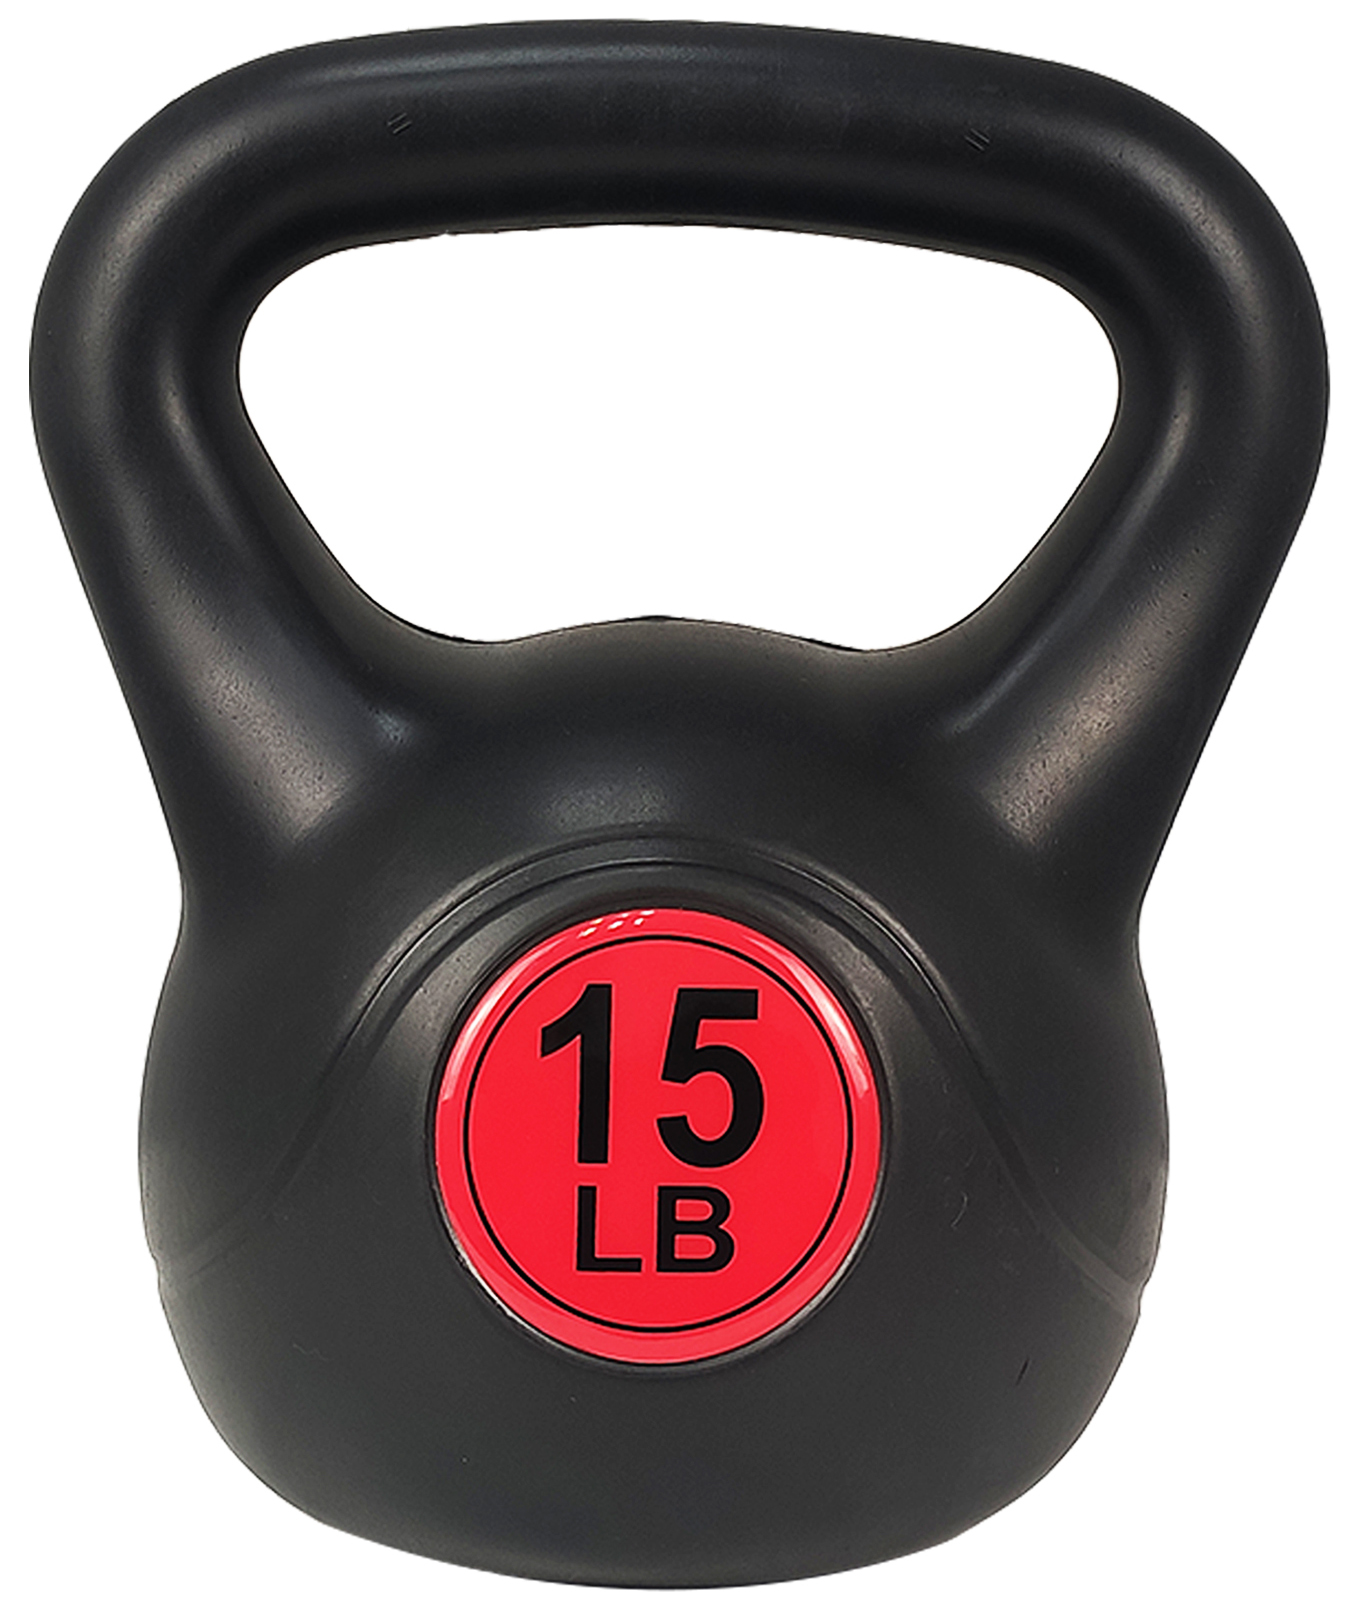 BalanceFrom Wide Grip Kettlebell Exercise Fitness Weight Set, 3-Pieces: 10lb, 15lb and 20lb Kettlebells - image 5 of 6